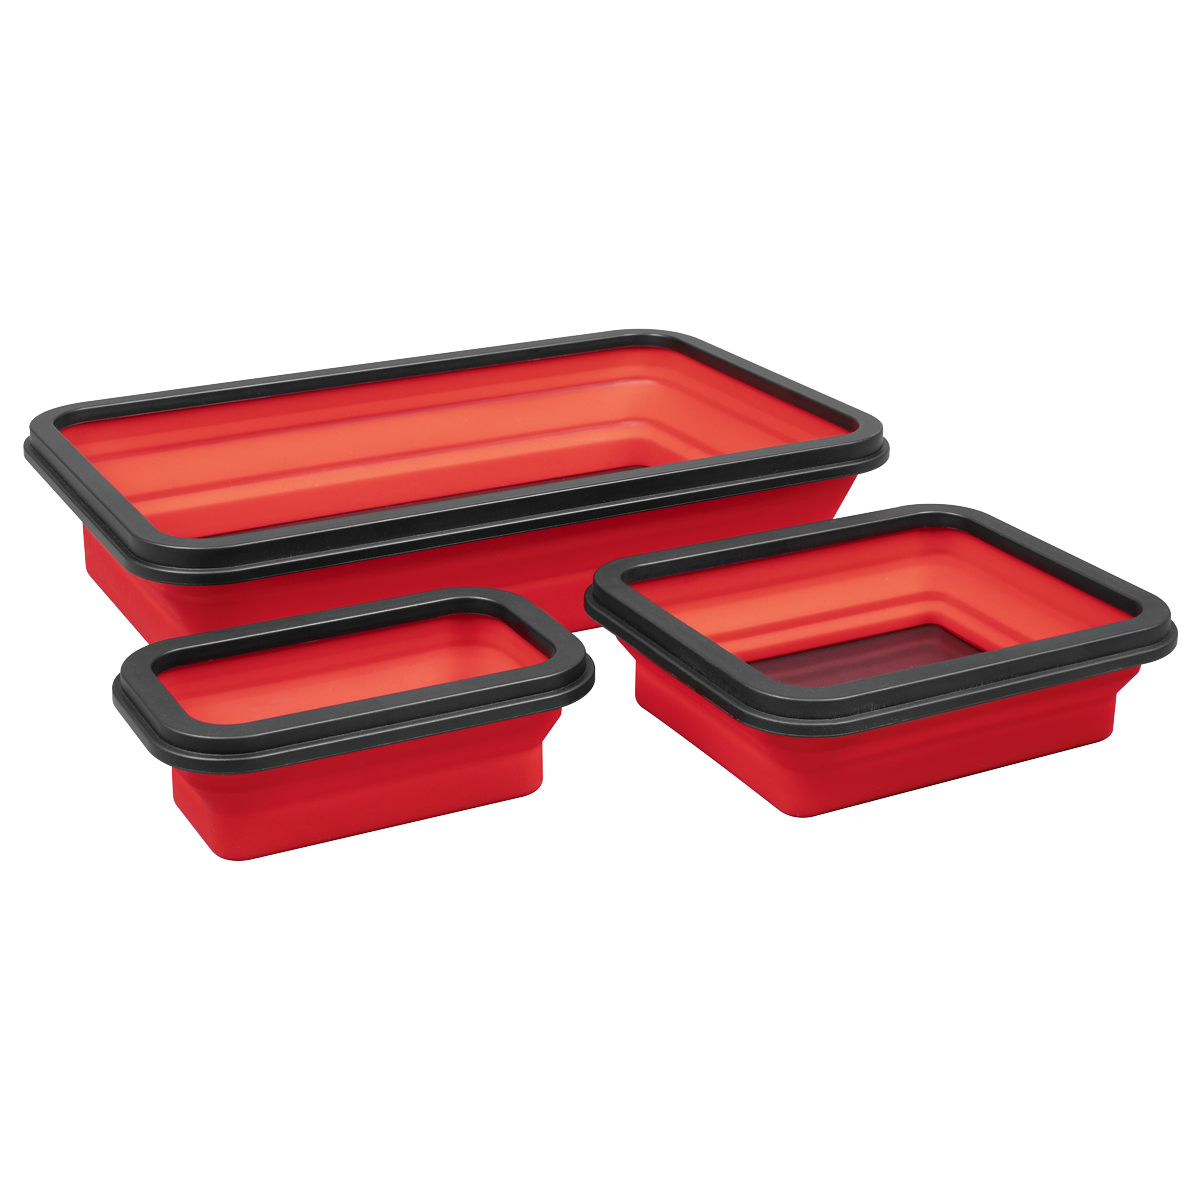 Parts Tray Collapsible Magnetic - Set of 3